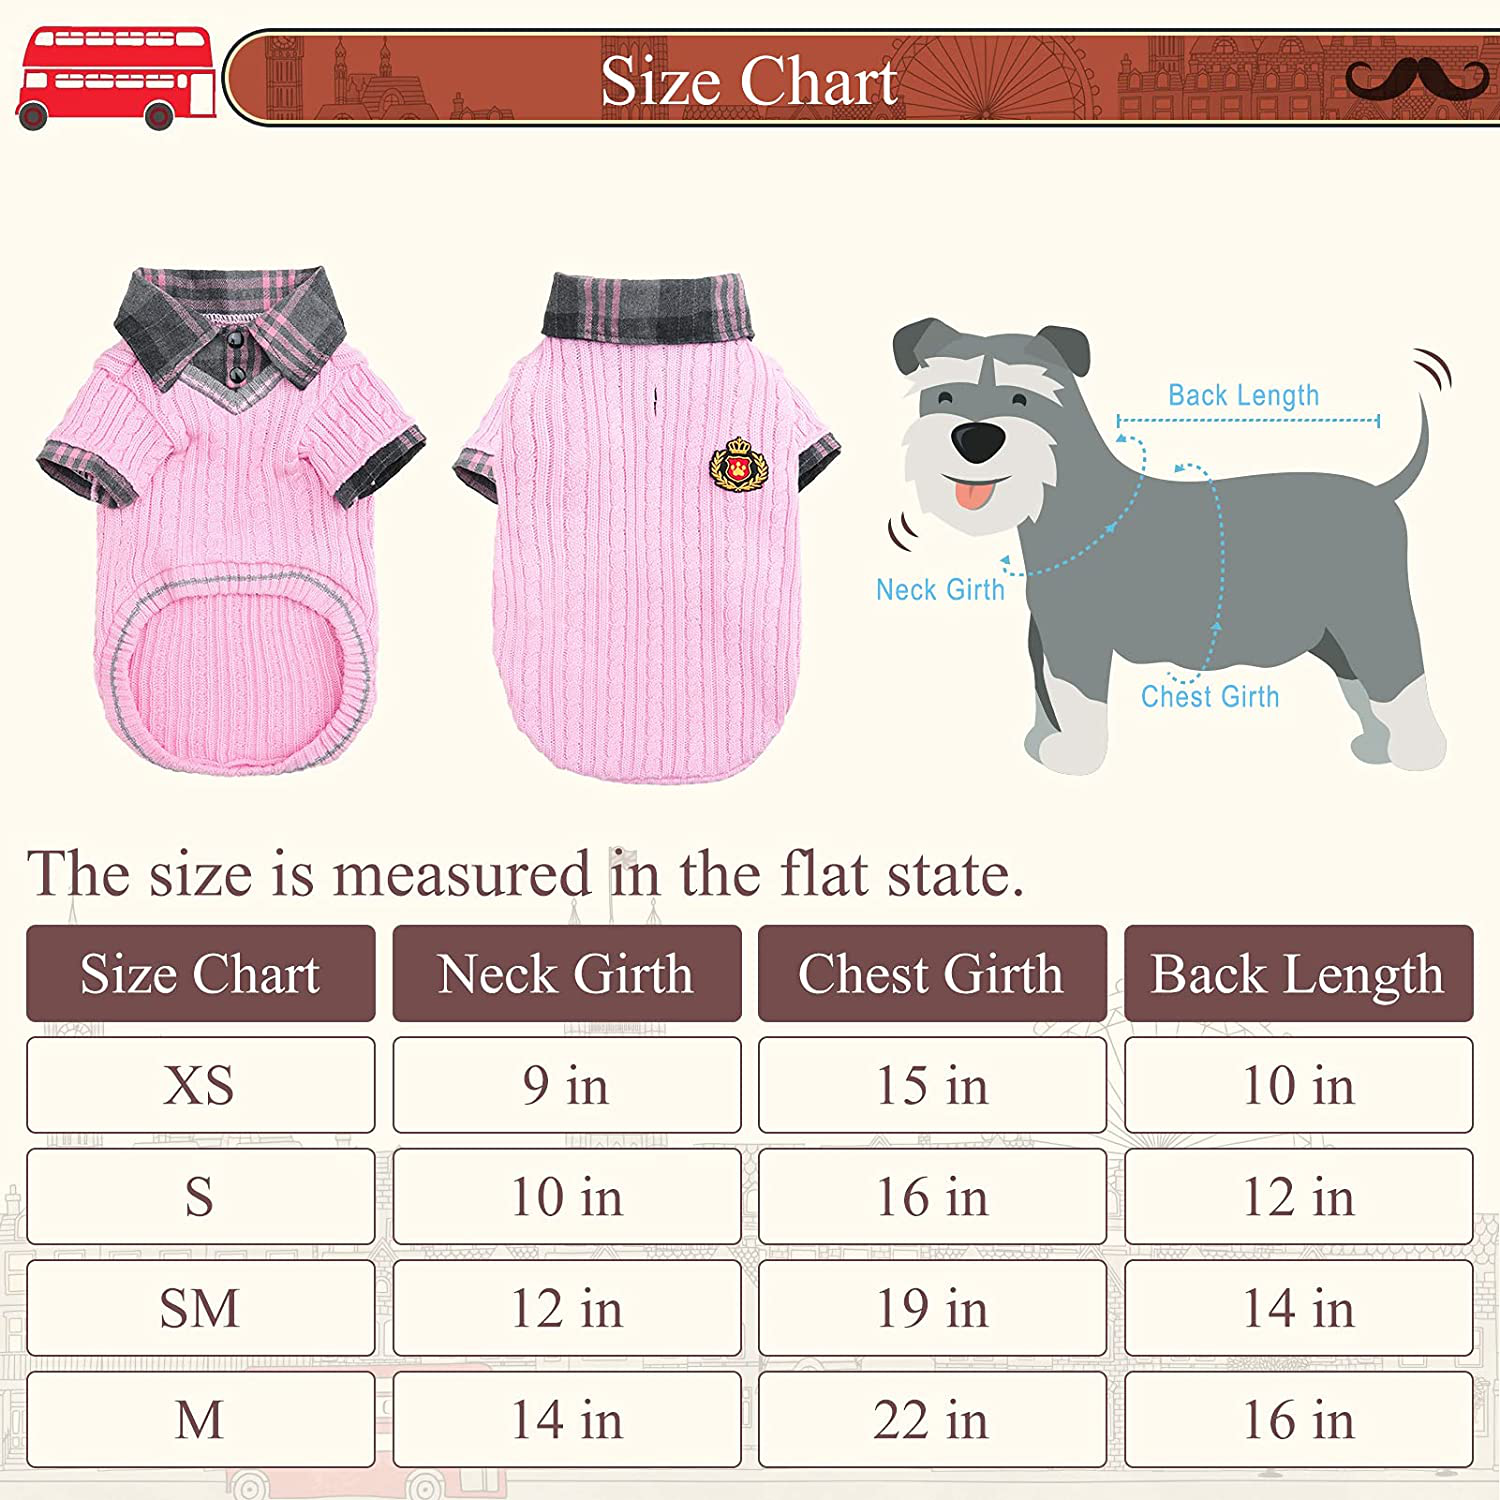 PUPTECK Soft Warm Dog Sweater Cute Knitted Dog Winter Clothes Classic Plaid British Style Dog Coats for Small Medium Dogs Animals & Pet Supplies > Pet Supplies > Dog Supplies > Dog Apparel PUPTECK   